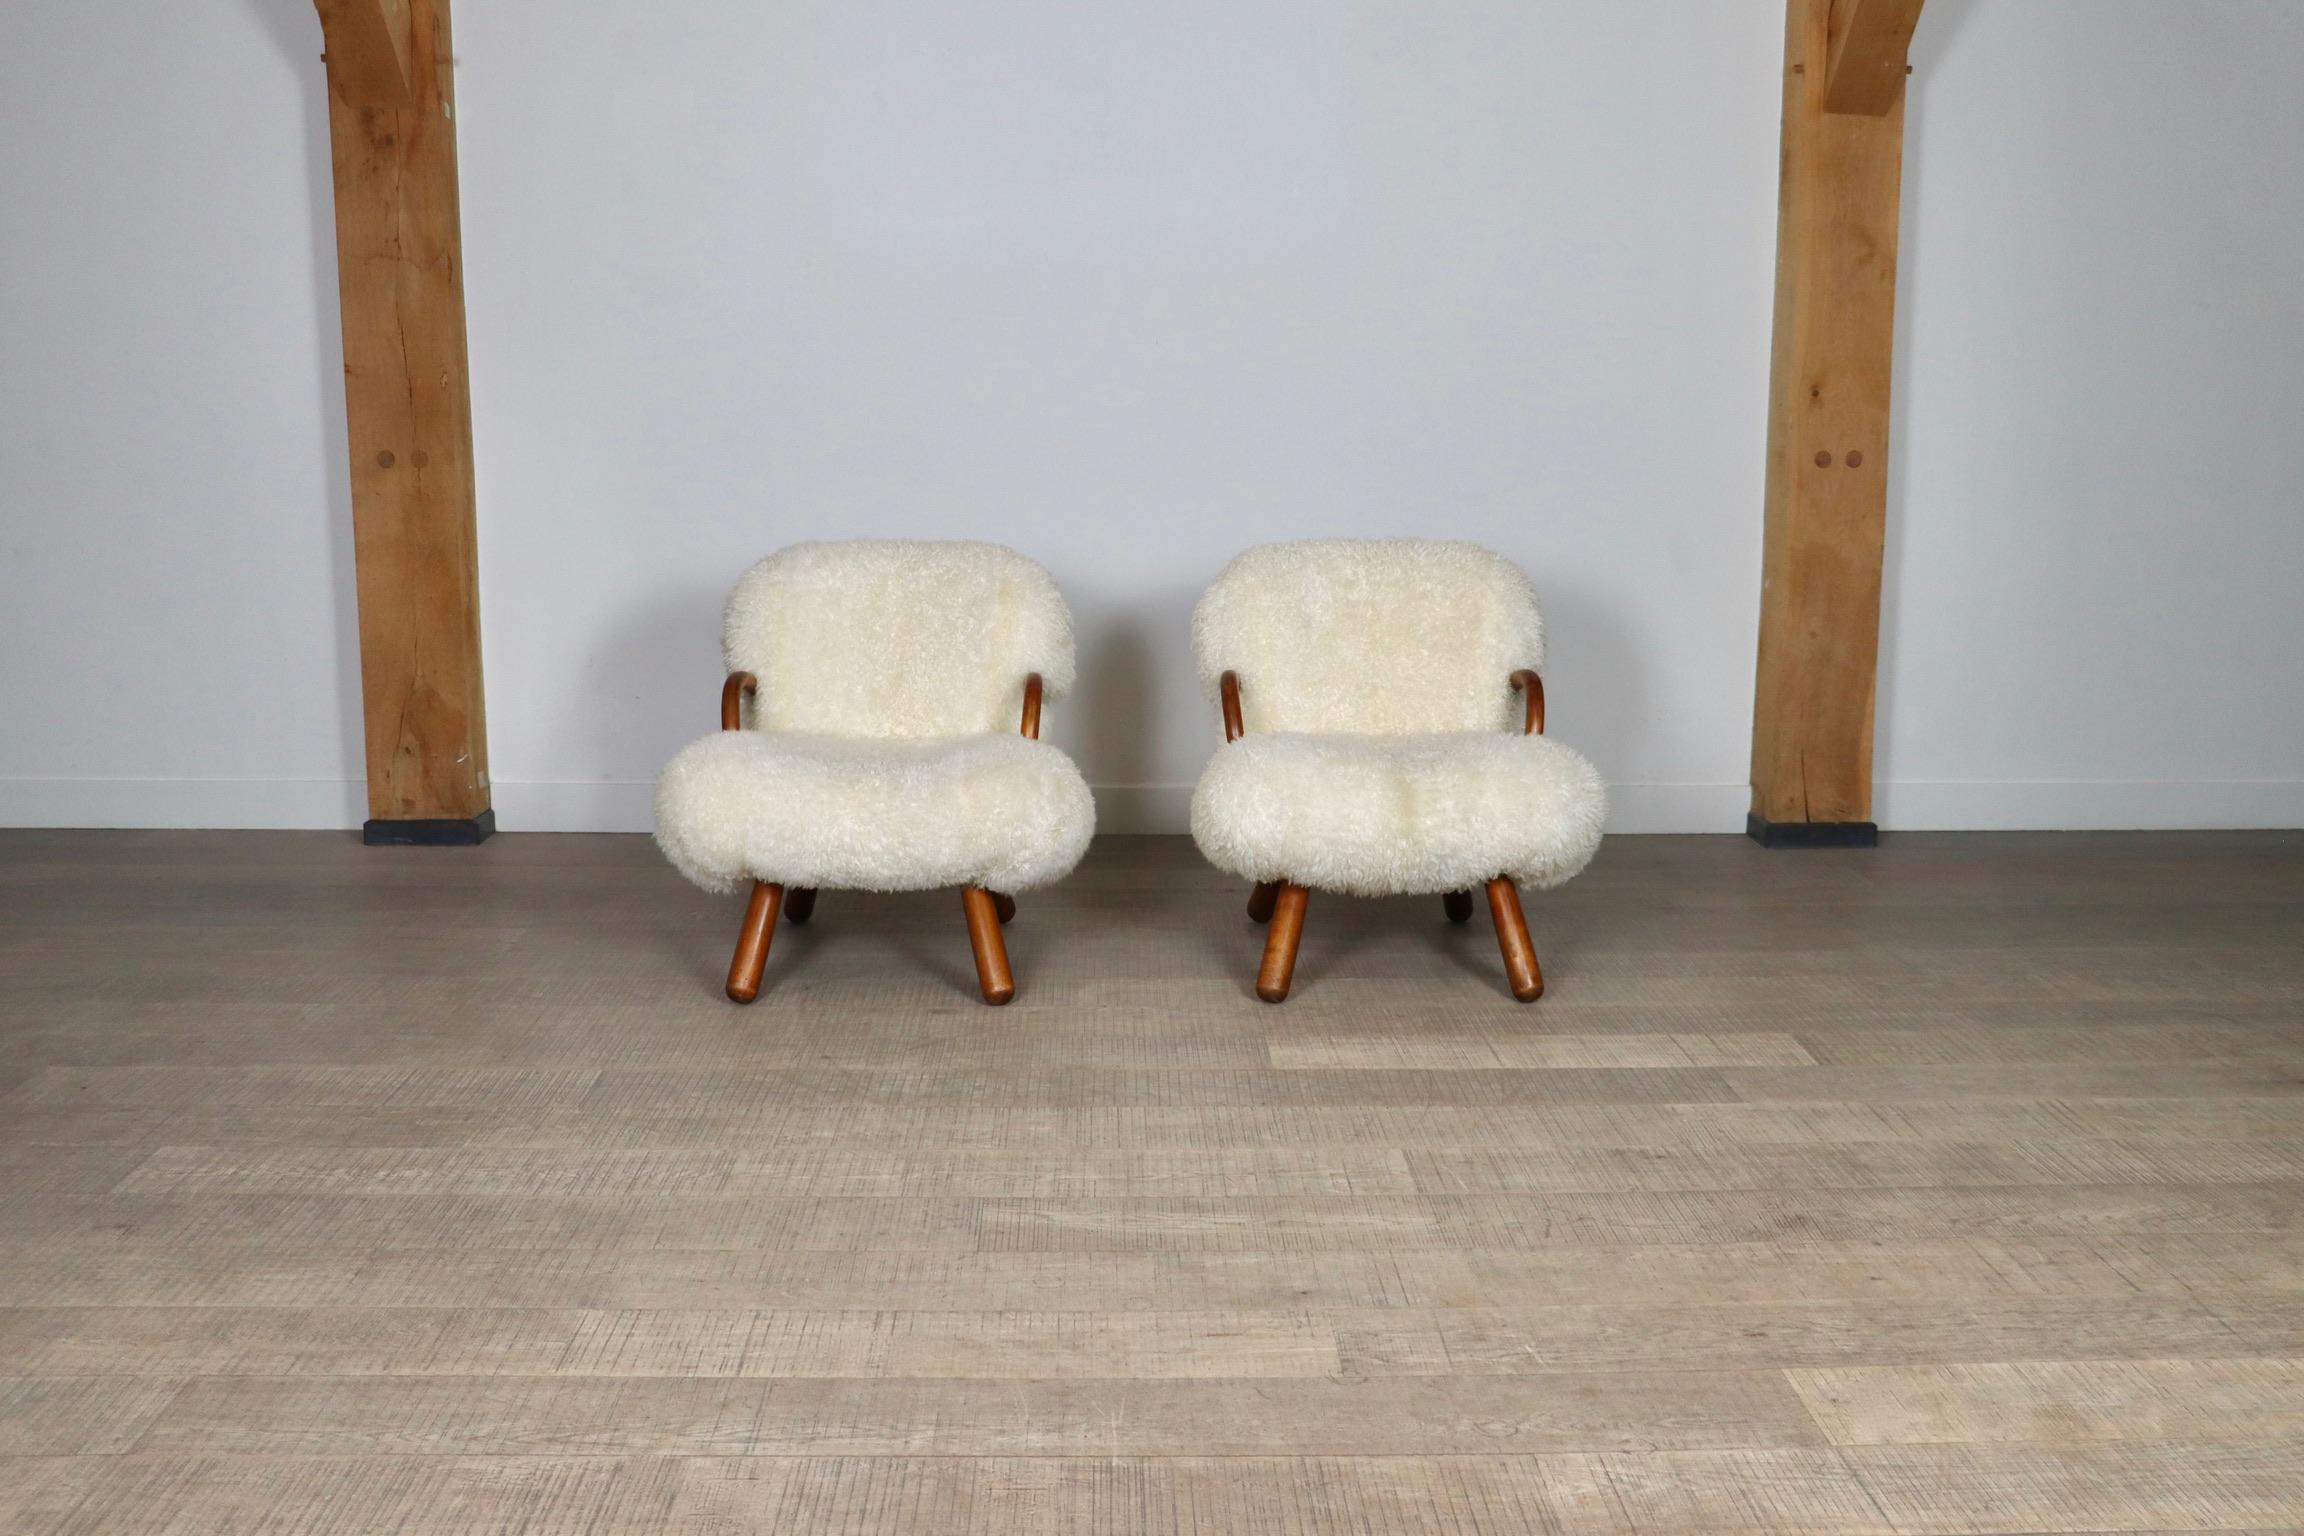 Early Pair Of Arnold Madsen Clam Chairs In Curly Sheepskin, 1944 For Sale 6